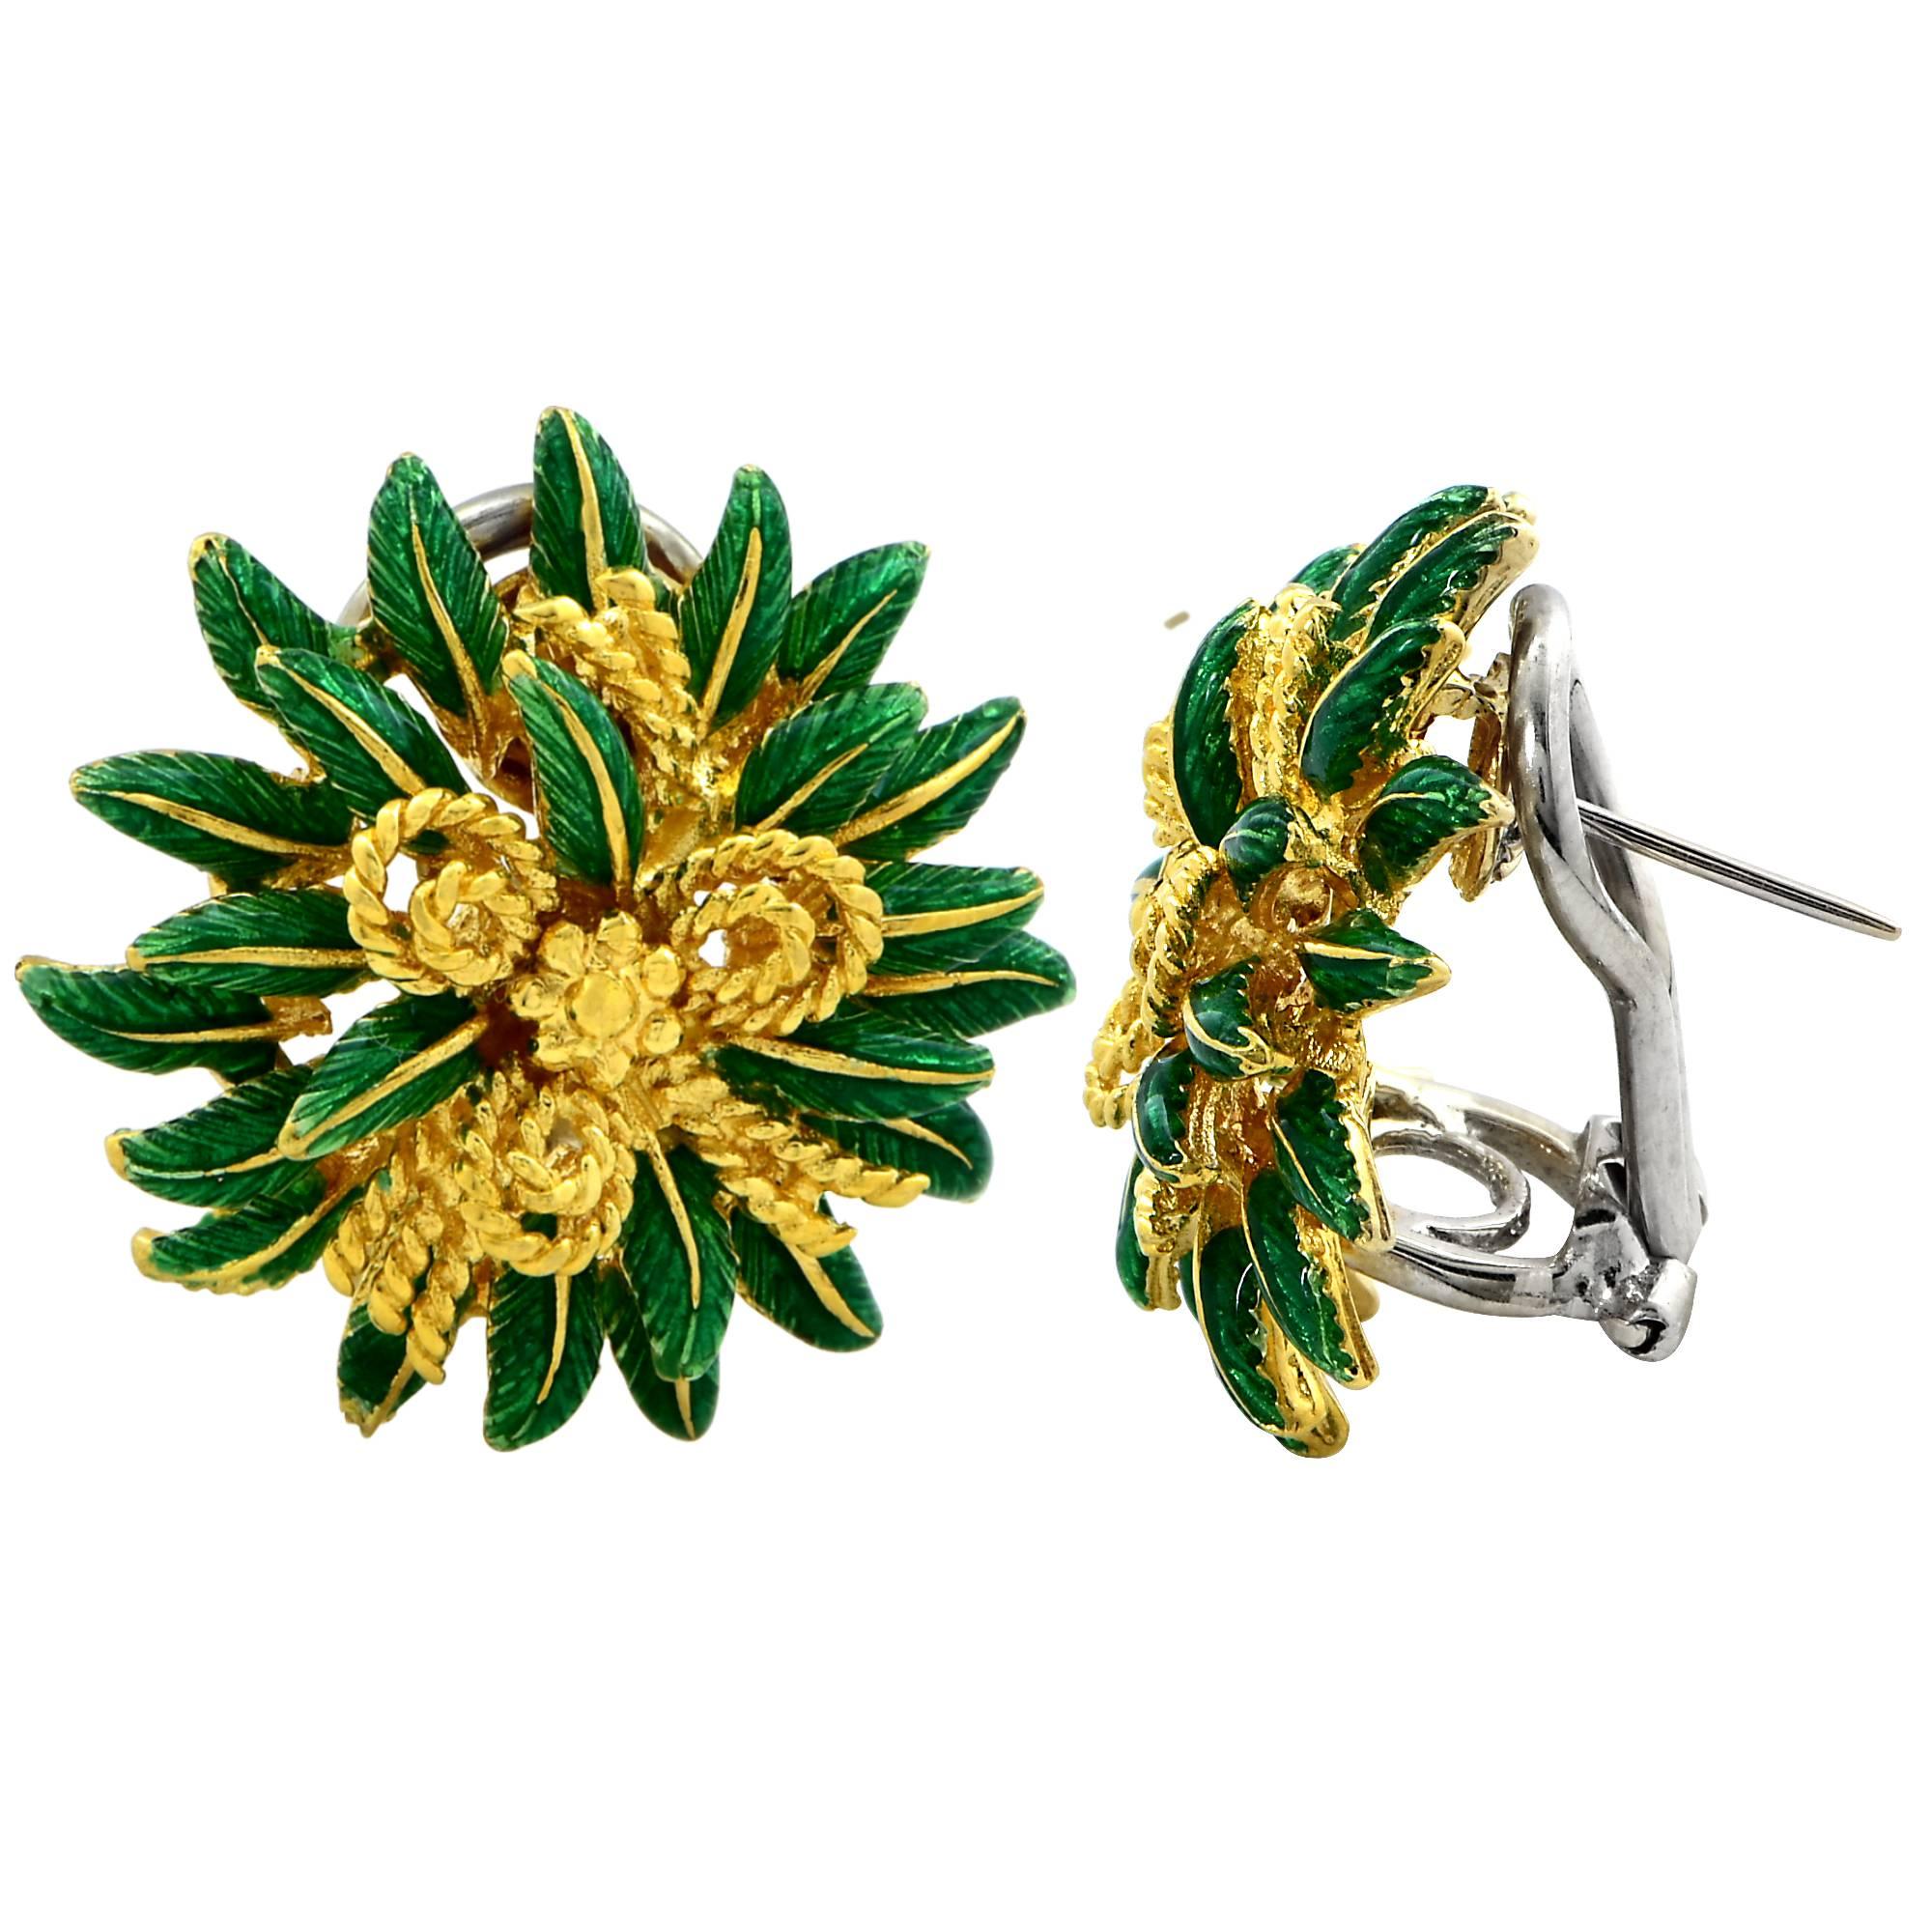 Beautifully crafted 18k yellow gold and enamel flower and twisted rope motif earrings. These earrings feature layers of vibrant green enamel petals intricately intertwined with twisted 18k yellow gold rope, culminating in a beautifully crafted bow.